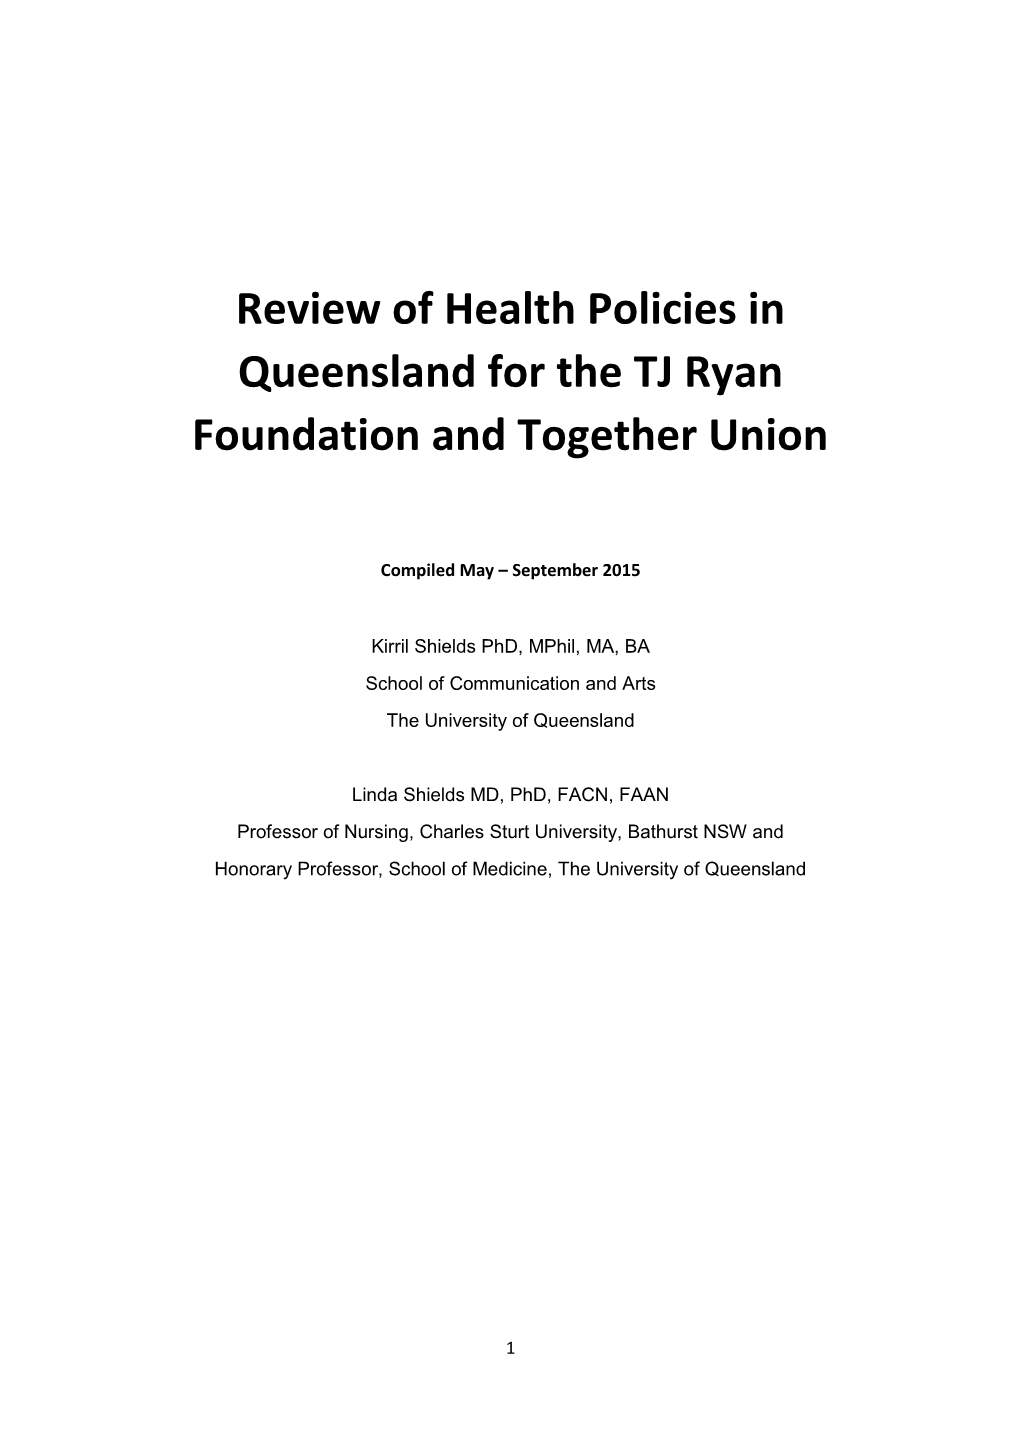 Review of Health Policies in Queensland for the TJ Ryan Foundation and Together Union